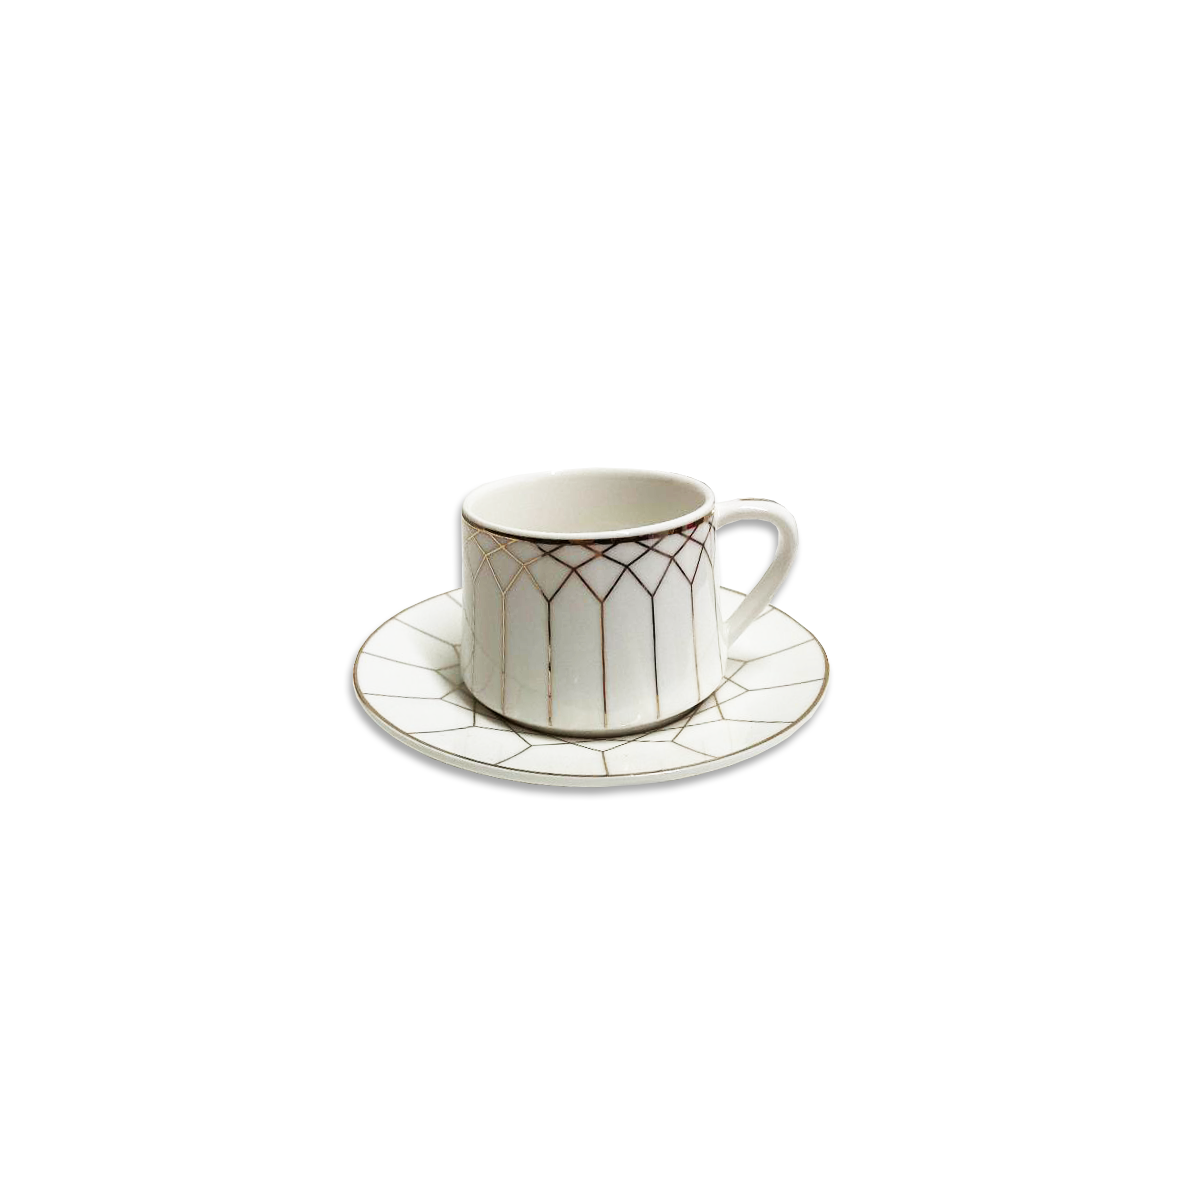 12 PC White & Gold Turkish Coffee Cup and Saucer